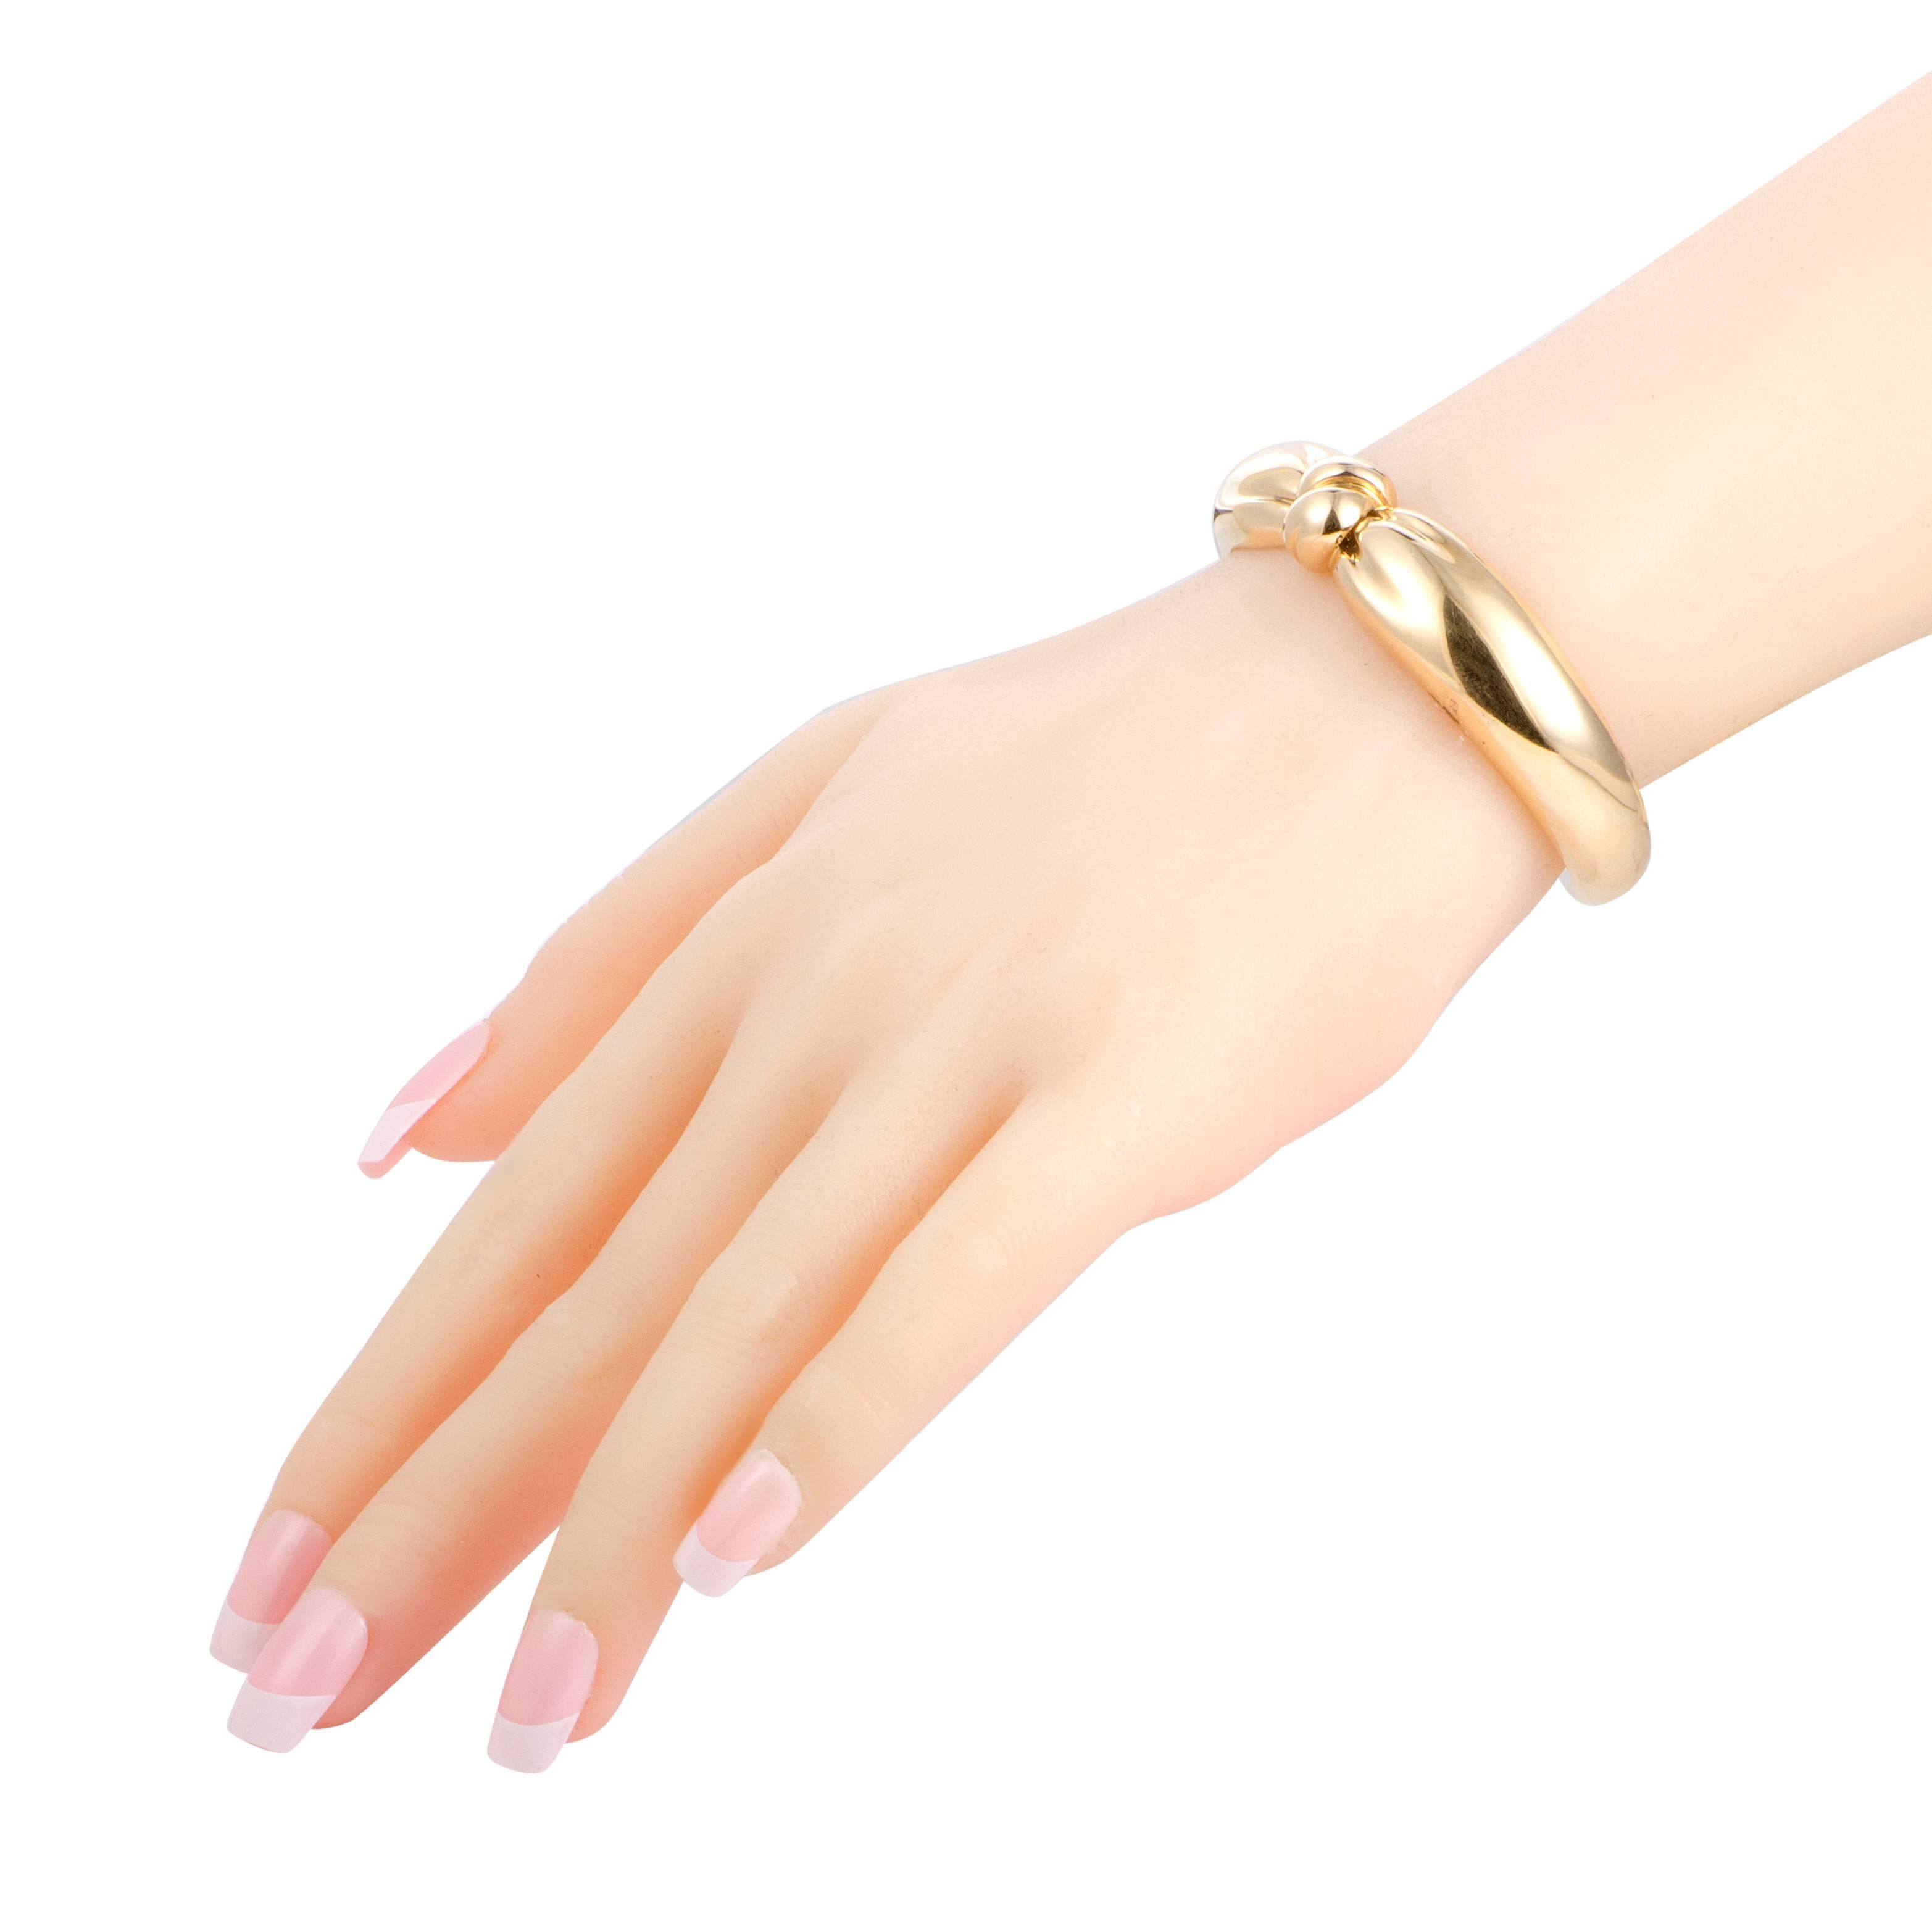 This sublime bracelet is the perfect embodiment of understated elegance with its uncluttered design that is impeccably presented in classy 18K yellow gold. The bracelet is designed by Van Cleef & Arpels and weighs 42.7 grams.
Included Items: